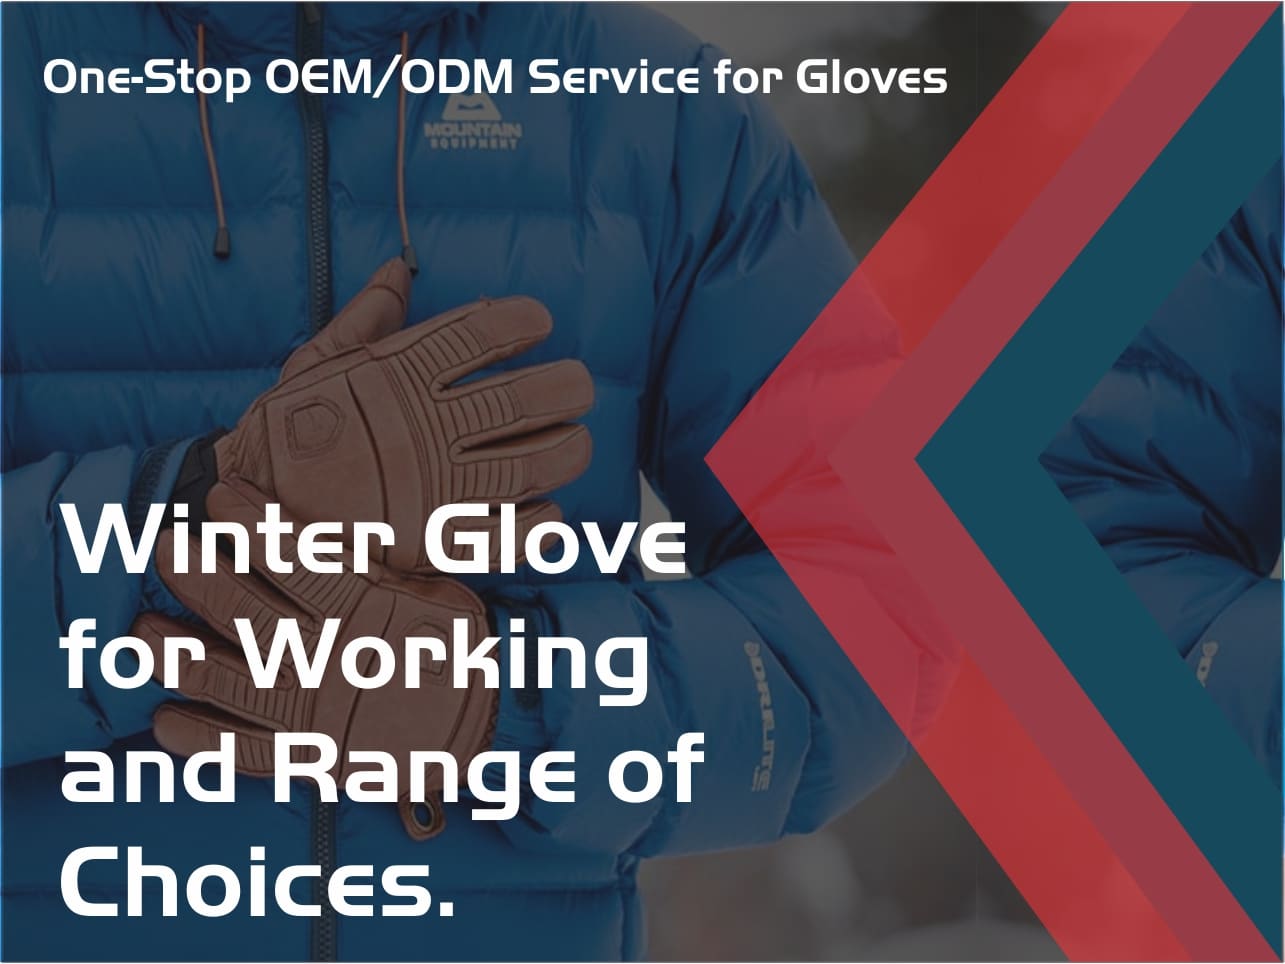 Winter Glove for Working: One-Stop OEM/ODM Service